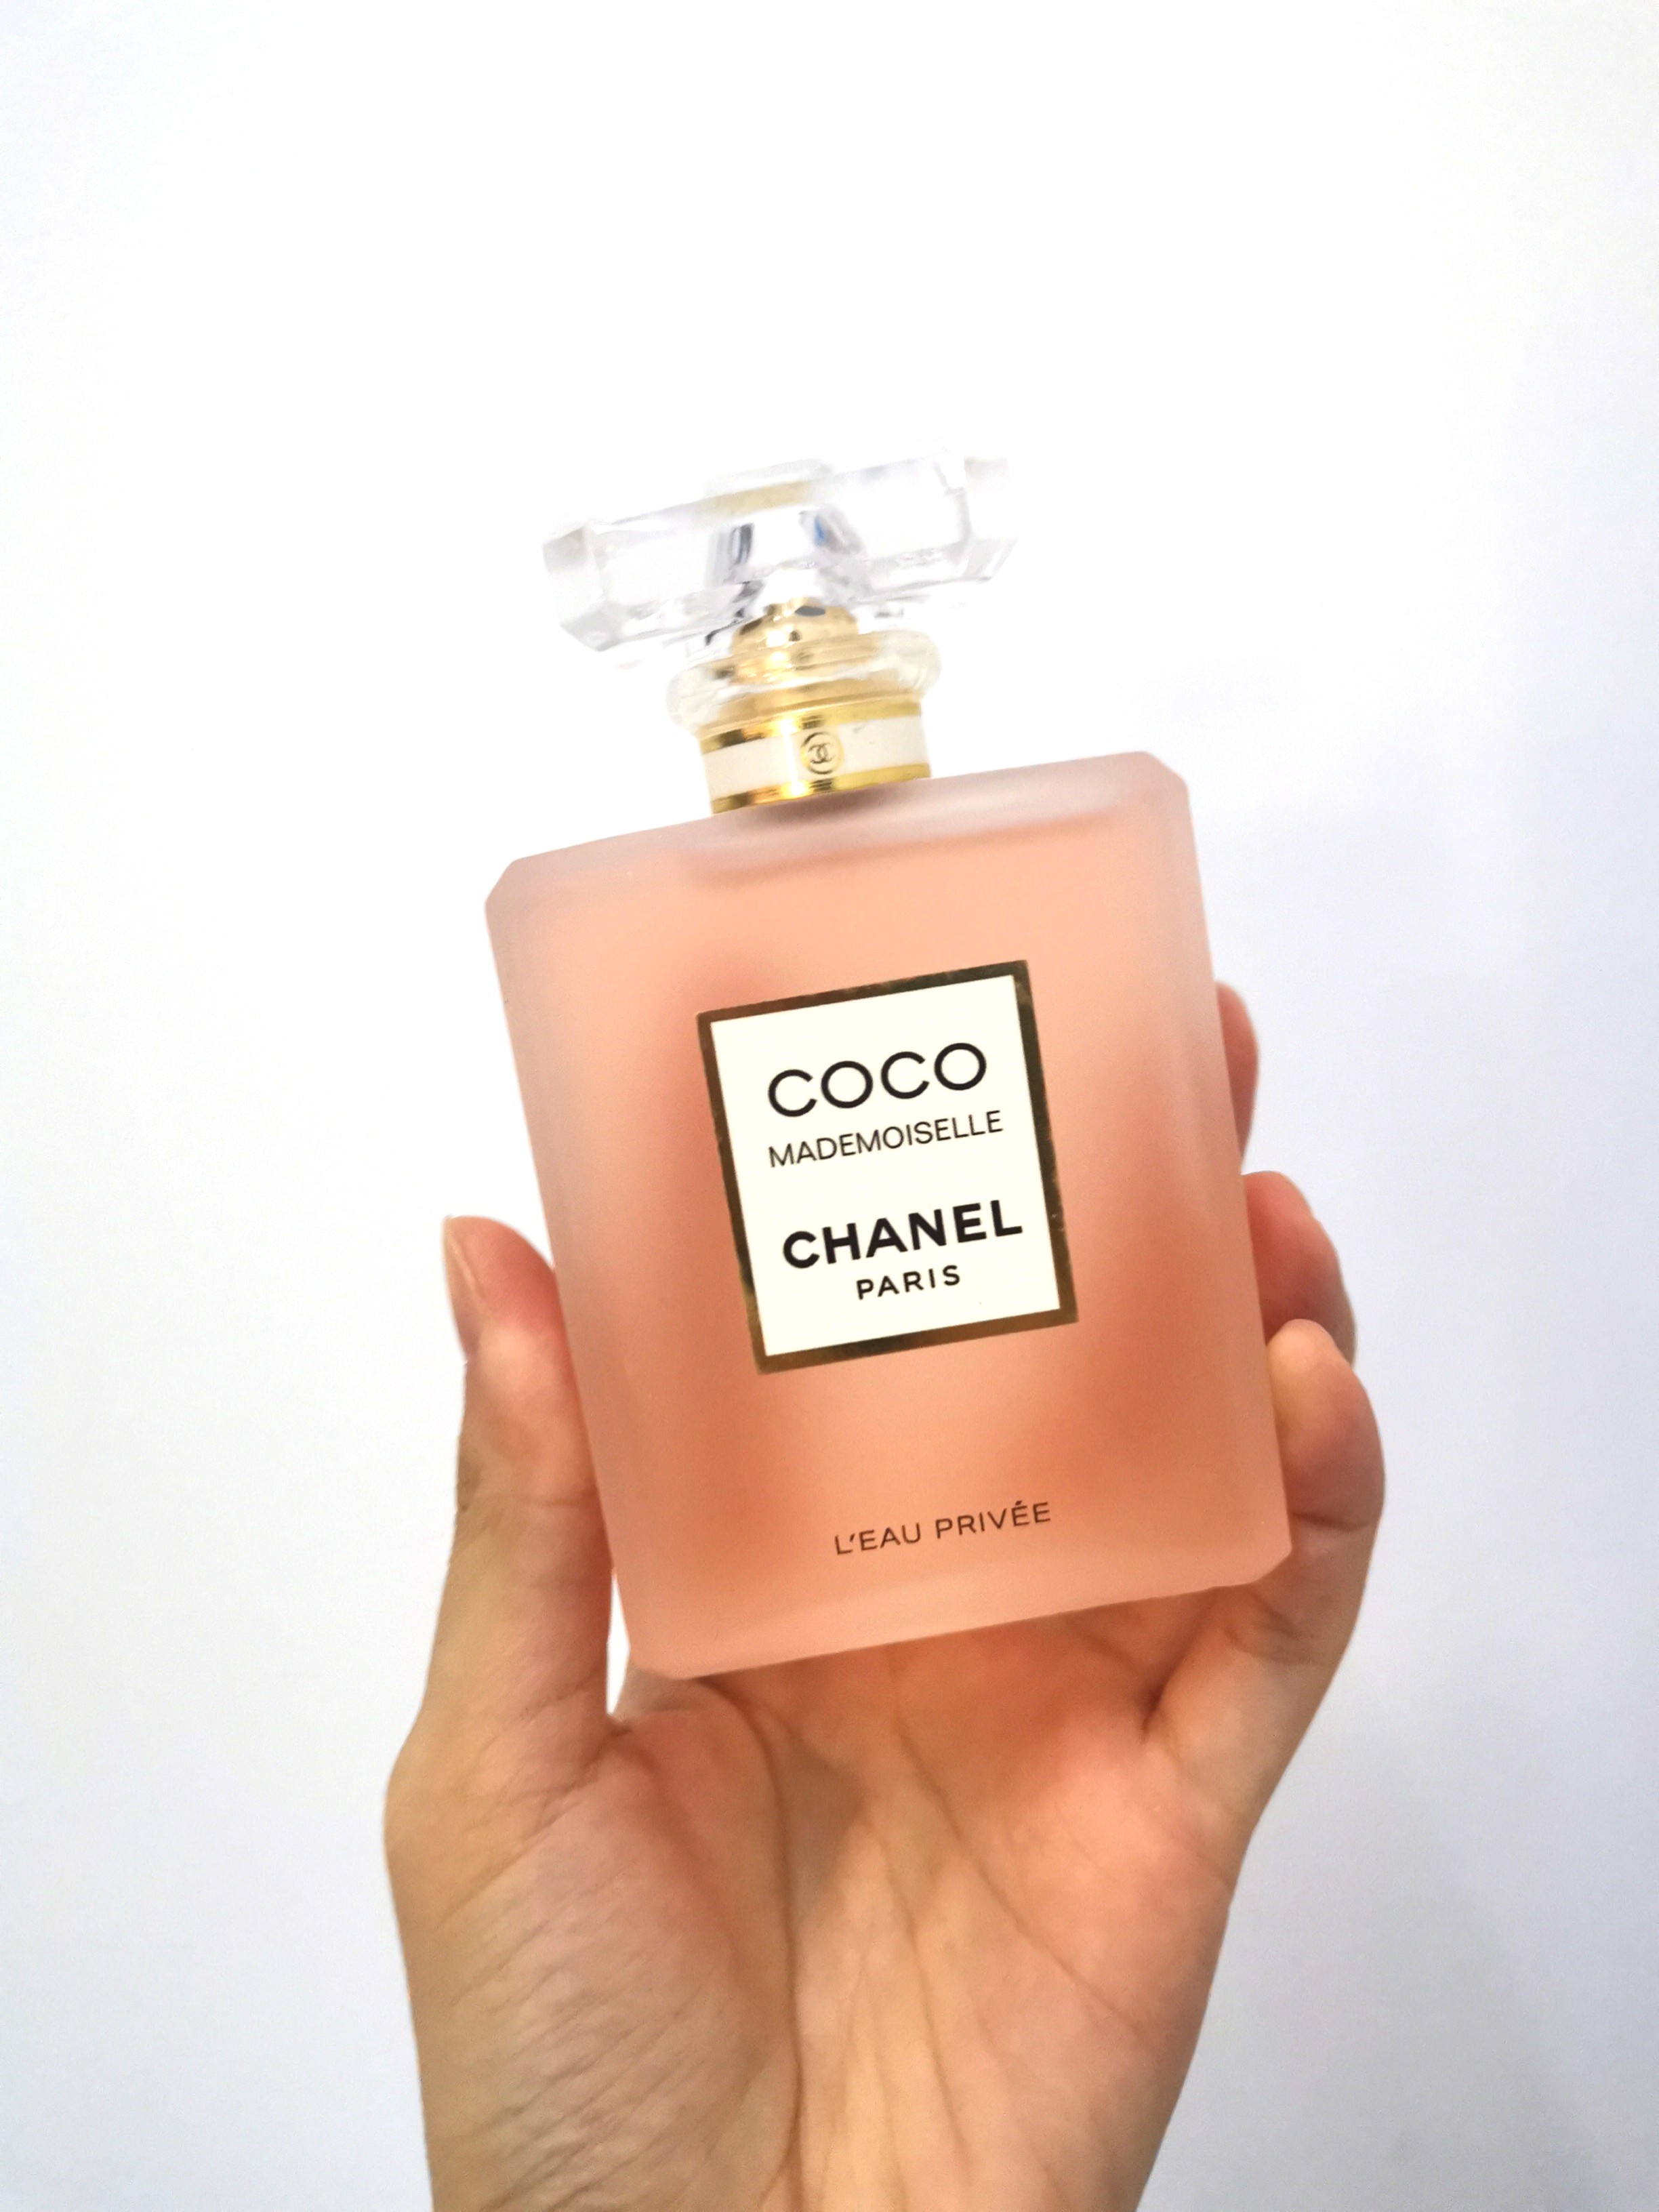 Chanel Coco Mademoiselle EDP review: my HG Night time perfume